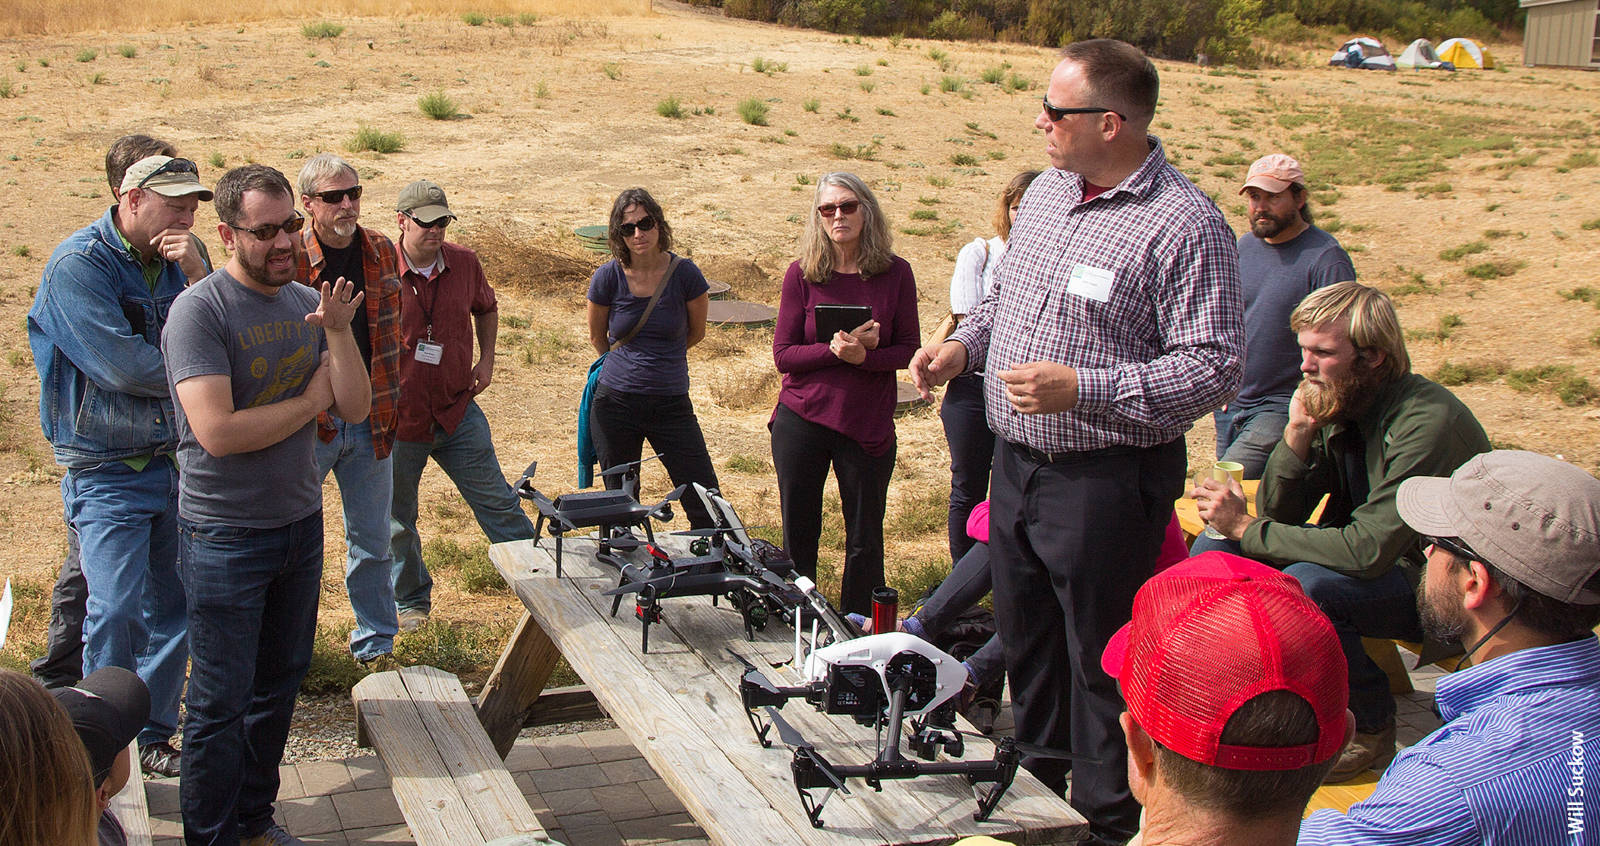 Author Sean Hogan discusses drone technology with a group of managers from the University of California Natural Reserve System during a field day in October at the UC Berkeley Blue Oak Ranch Reserve, Santa Clara County.